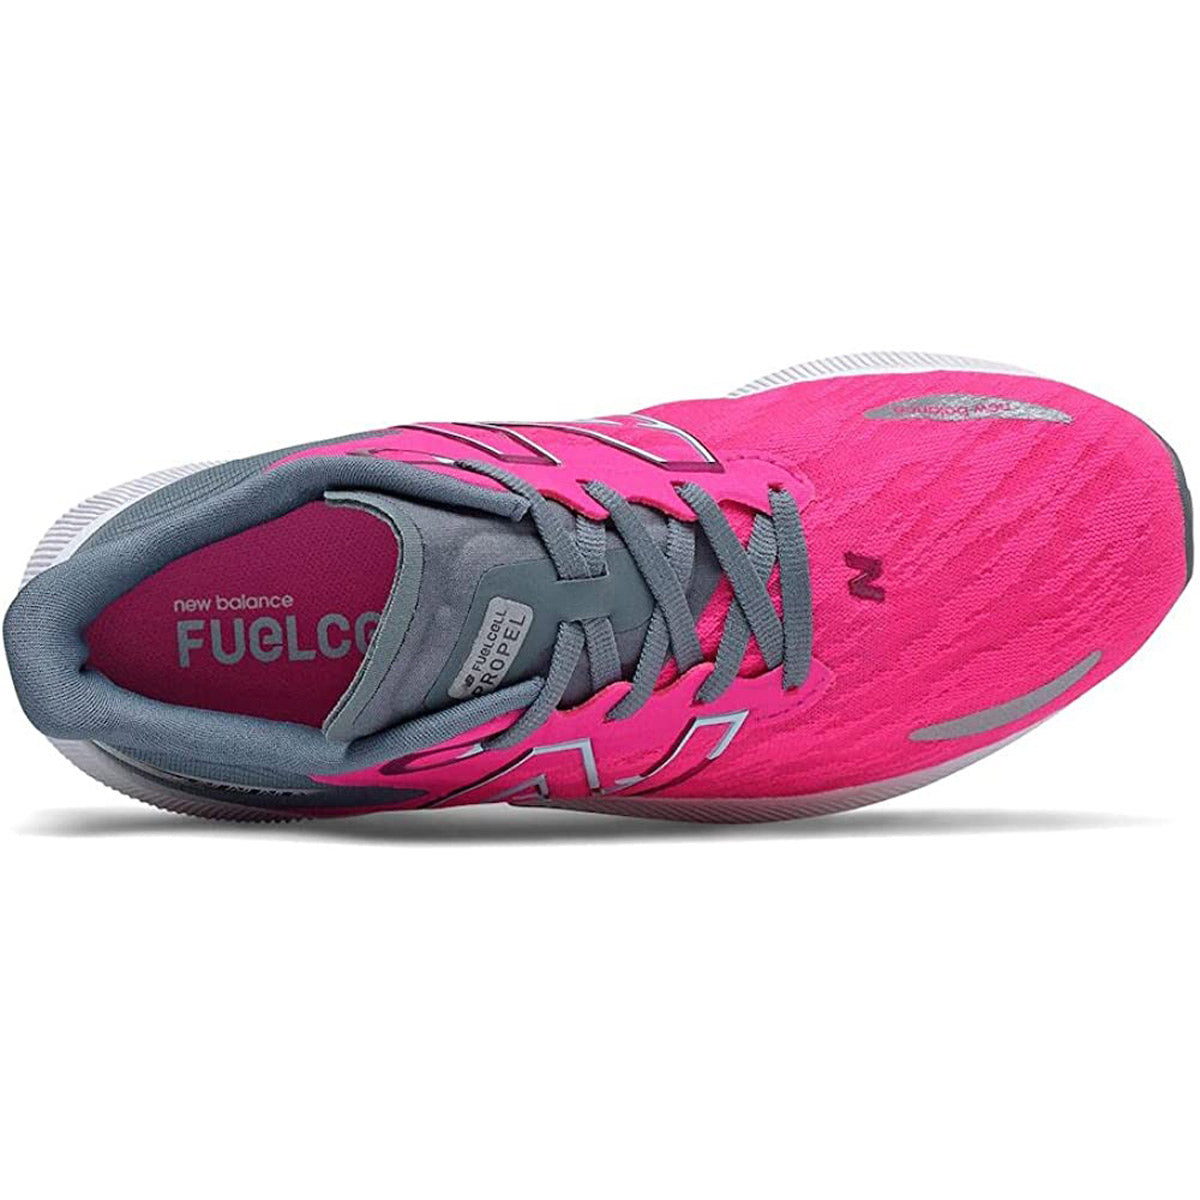 NEW BALANCE FUELCELL PROPEL V3 PINK GLO - KIDS